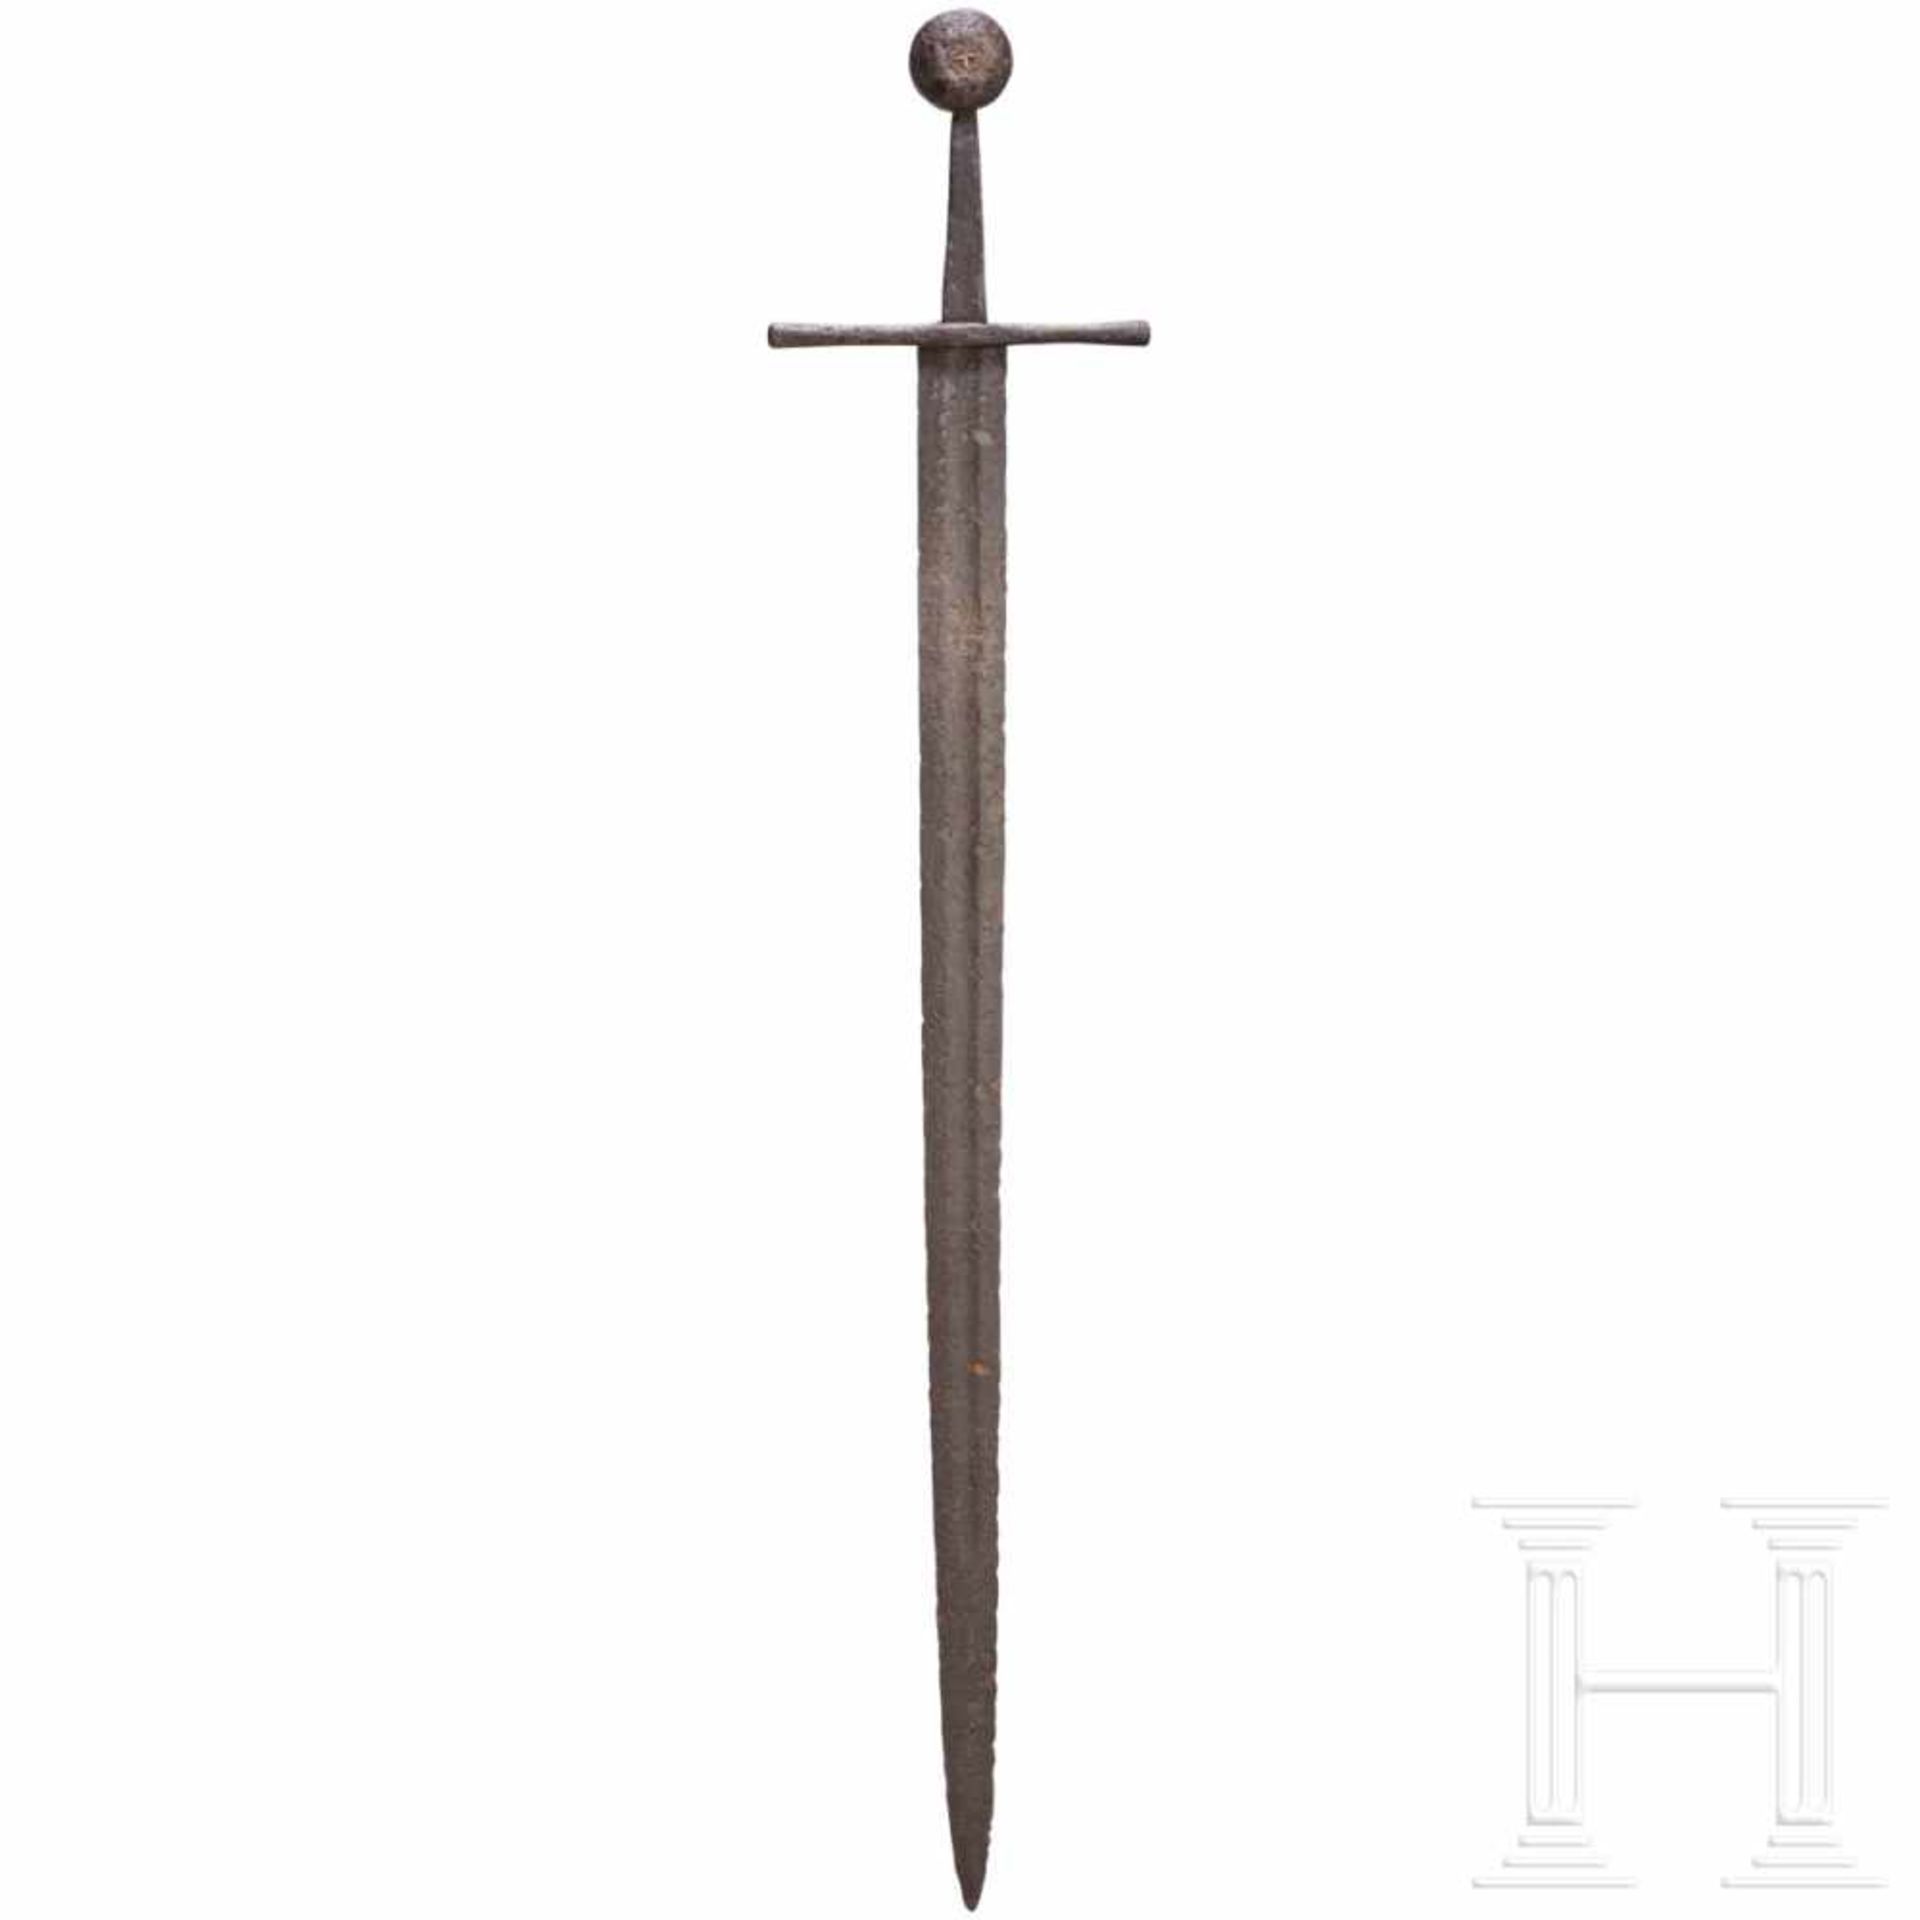 A German sword with disc pommel, circa 1300Sturdy, double-edged blade with long fuller on either